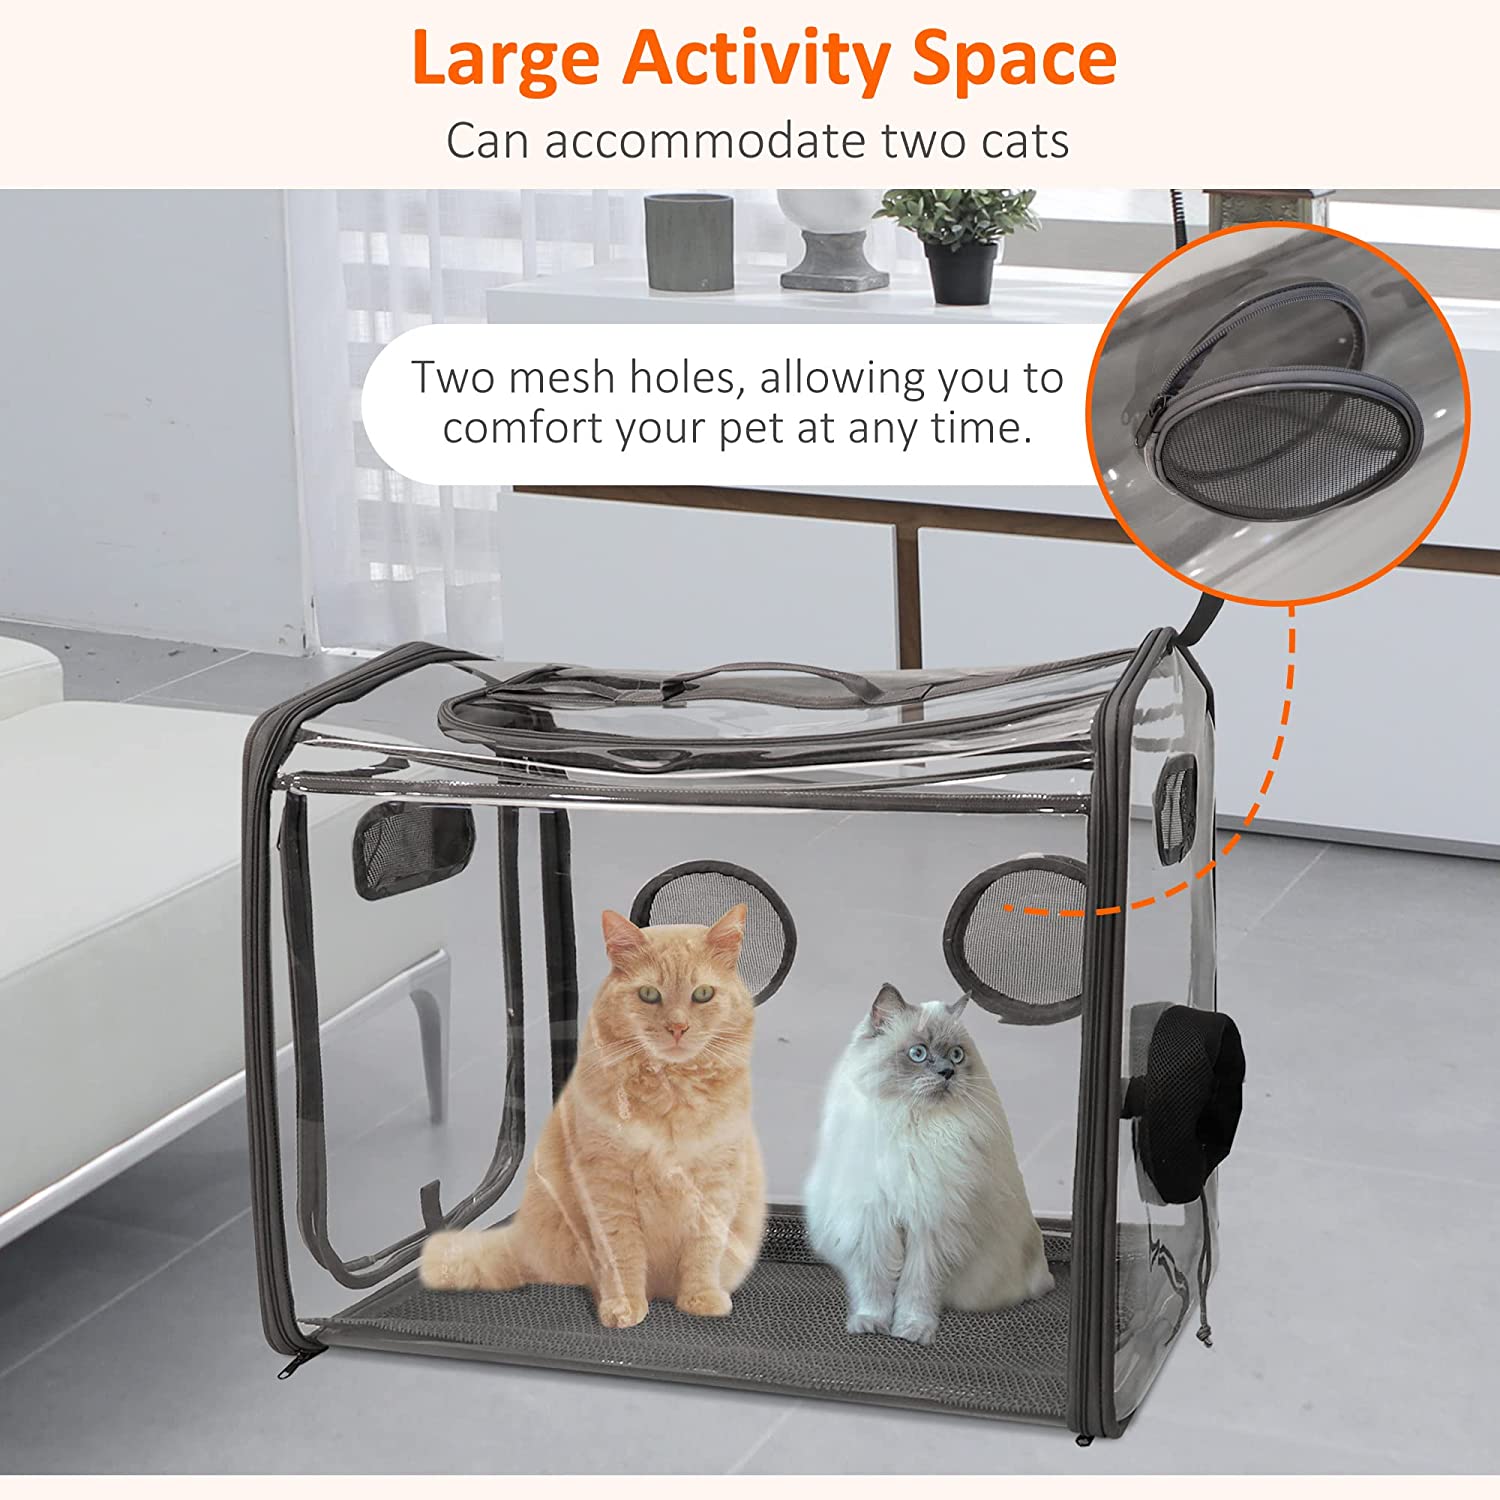 Pet Drying Box, Portable Cat Dryer Box, Foldable Pet Dryer Cage with Transparent PVC Material, Hands-Free, Dog Hair Drying Box